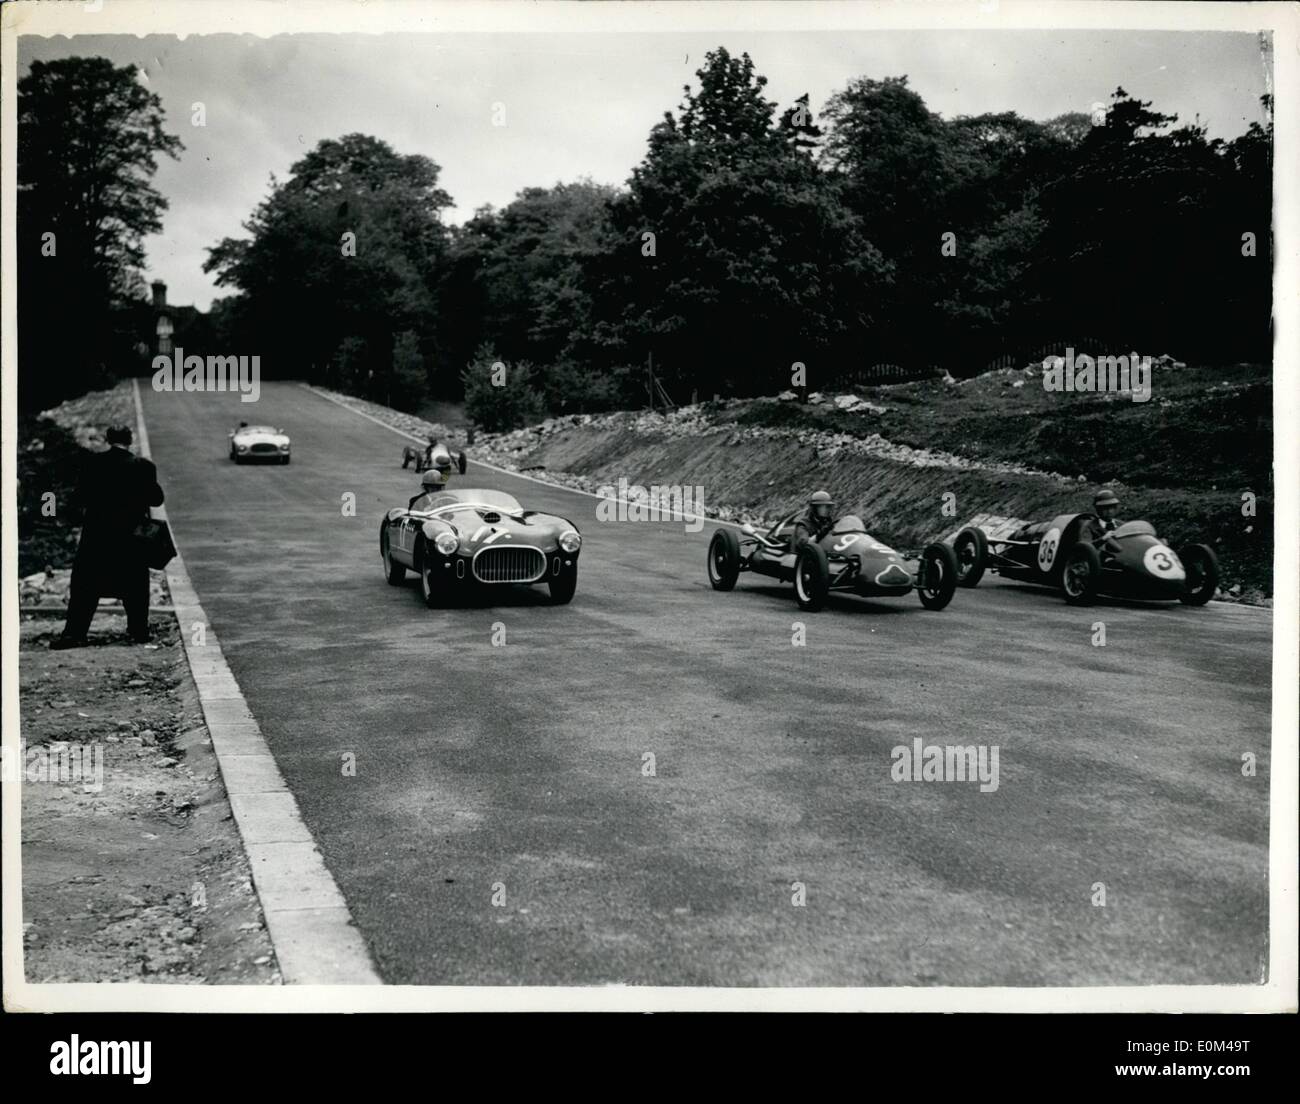 May 05, 1953 - Motor Racing Practice At Crystal Palace: Arrangements are going a head at the Crystal Palace motor racing track preparation for the first meeting on Whit Monday, May 25th, which is being organised by the British Automobiles Racing Club. The construction of the new link section of the track to exclude the inner loop is now completed. Several racing cars were at speed today, testing the new circuit. Photo Shows A group of racing cars seen at speed coming down the new fast approach to the finishing line - on the new circuit at Crystal Palace today. Stock Photo